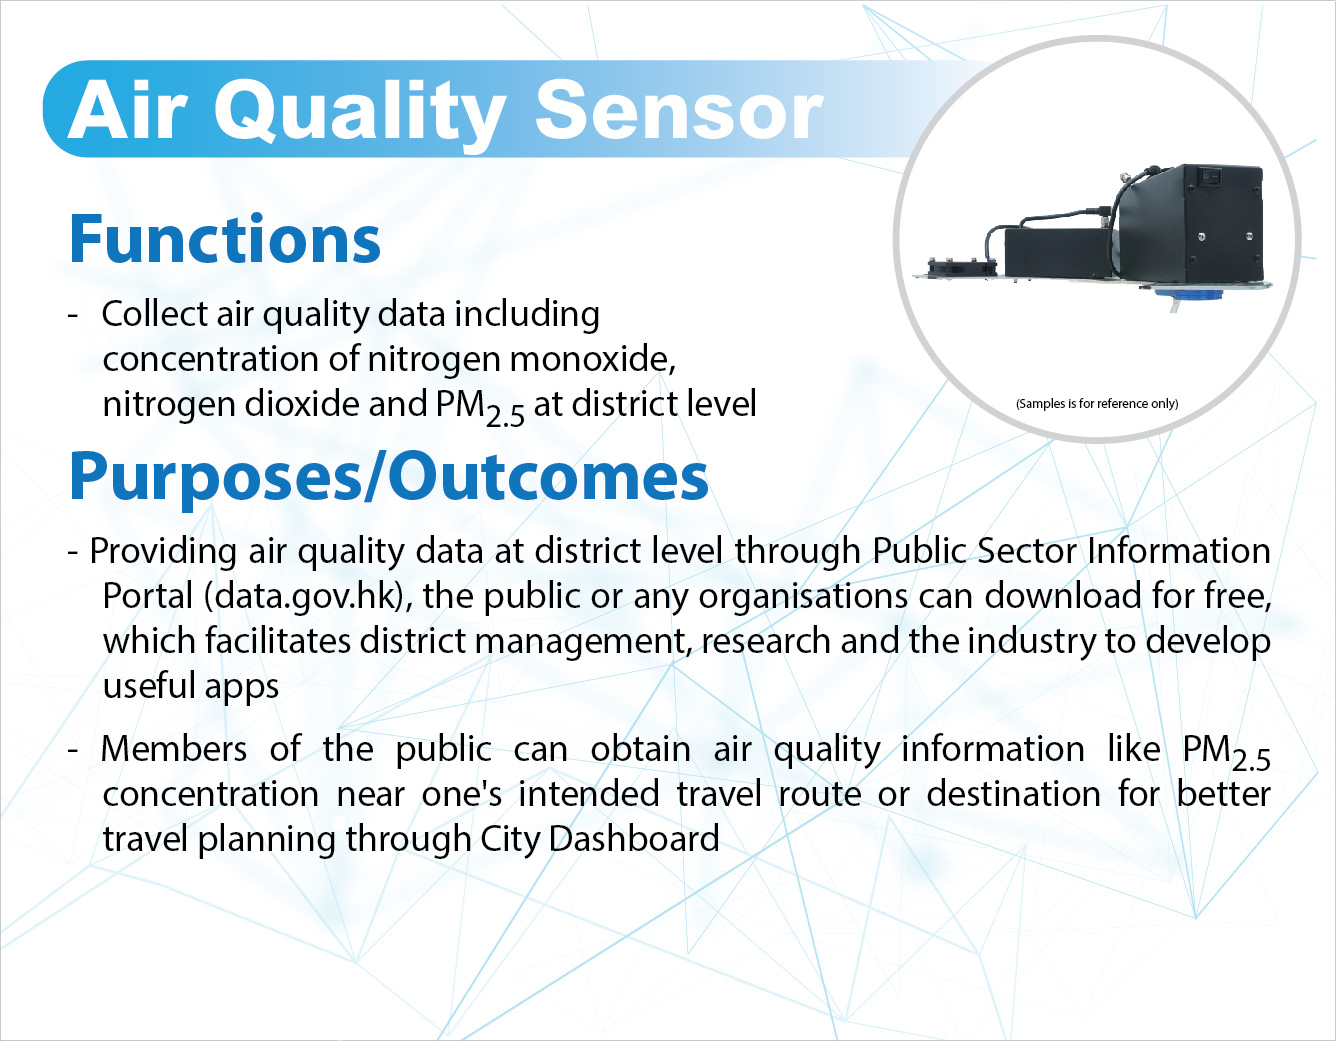 Air Quality Sensor,
					Functions -
					Collect air quality data including concentration of nitrogen monoxide, nitrogen dioxide and PM 2.5 at district level.

					Purposes/Outcomes -
					Providing air quality data at district level through Public Sector Information Portal (data.gov.hk), the public or any organisations can download for free, which facilitates district management, research and the industry to develop useful apps.
					Members of the public can obtain air quality information like PM 2.5 concentration near one's intended travel route or destination for better travel planning through City Dashboard.